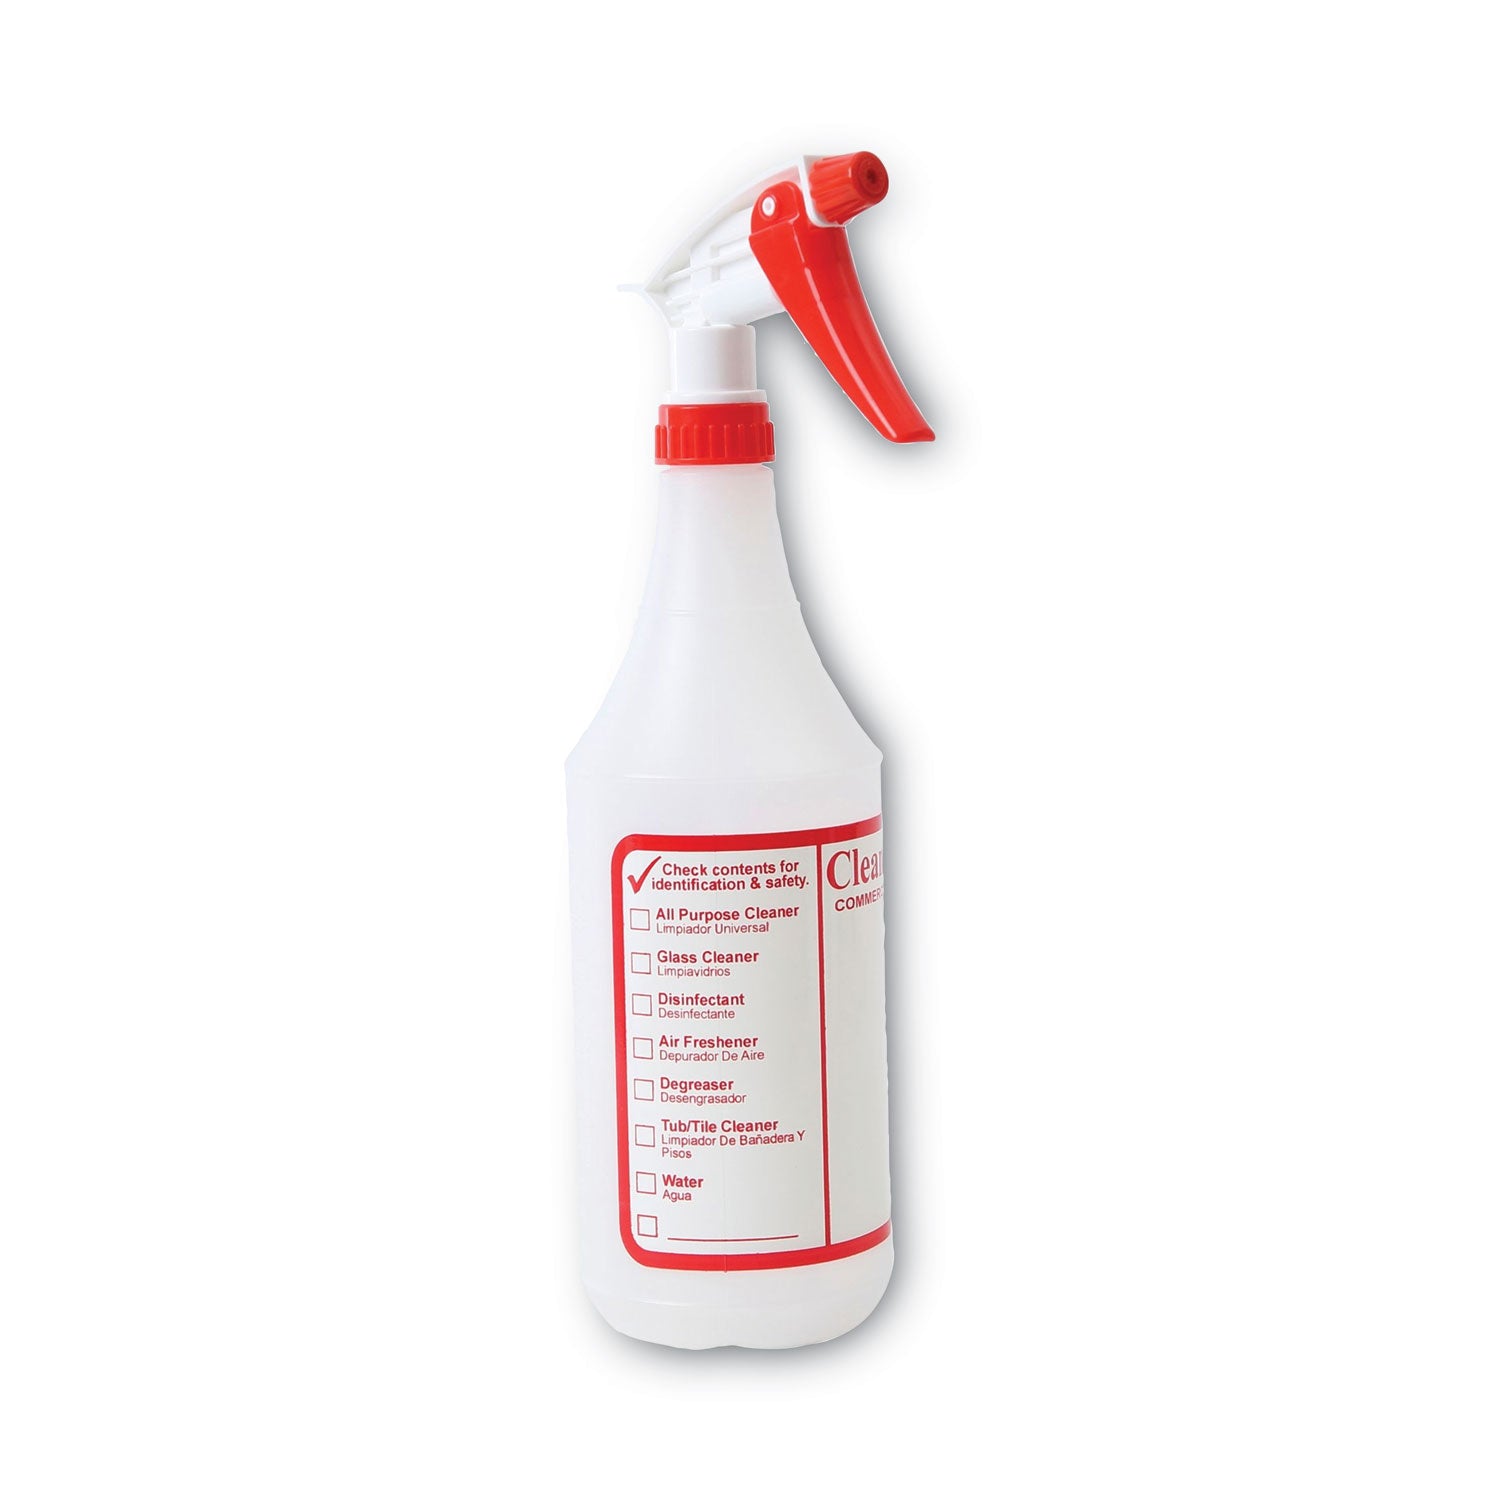 trigger-spray-bottle-32-oz-clear-red-hdpe-3-pack_bwk03010 - 2